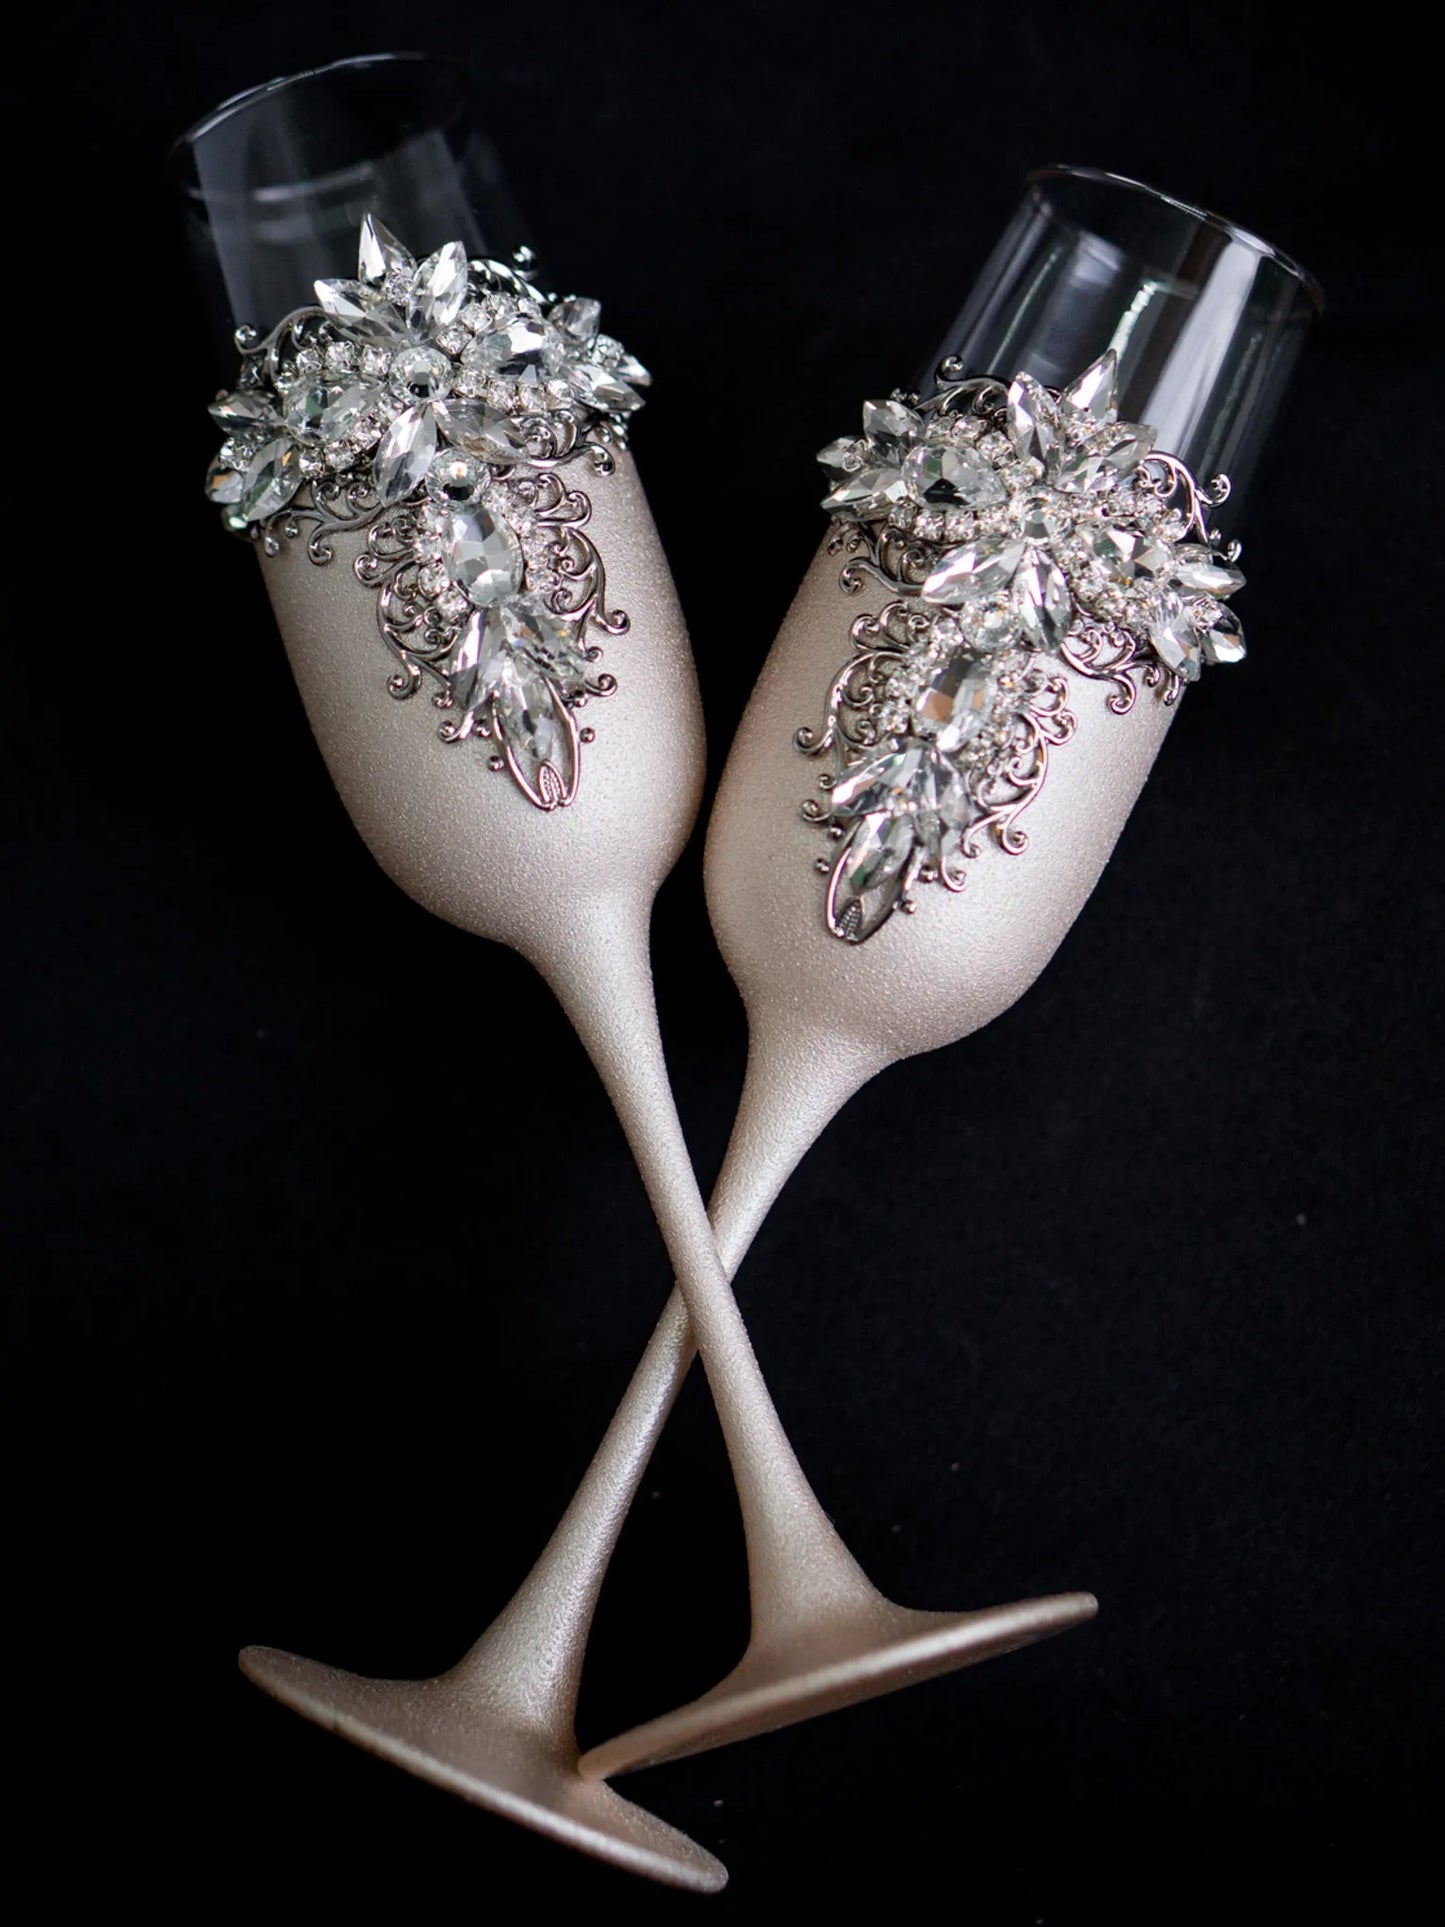 Silver and Ivory Personalized Crystals Mr. and Mrs. Champagne Flutes and Cake Serving Kit